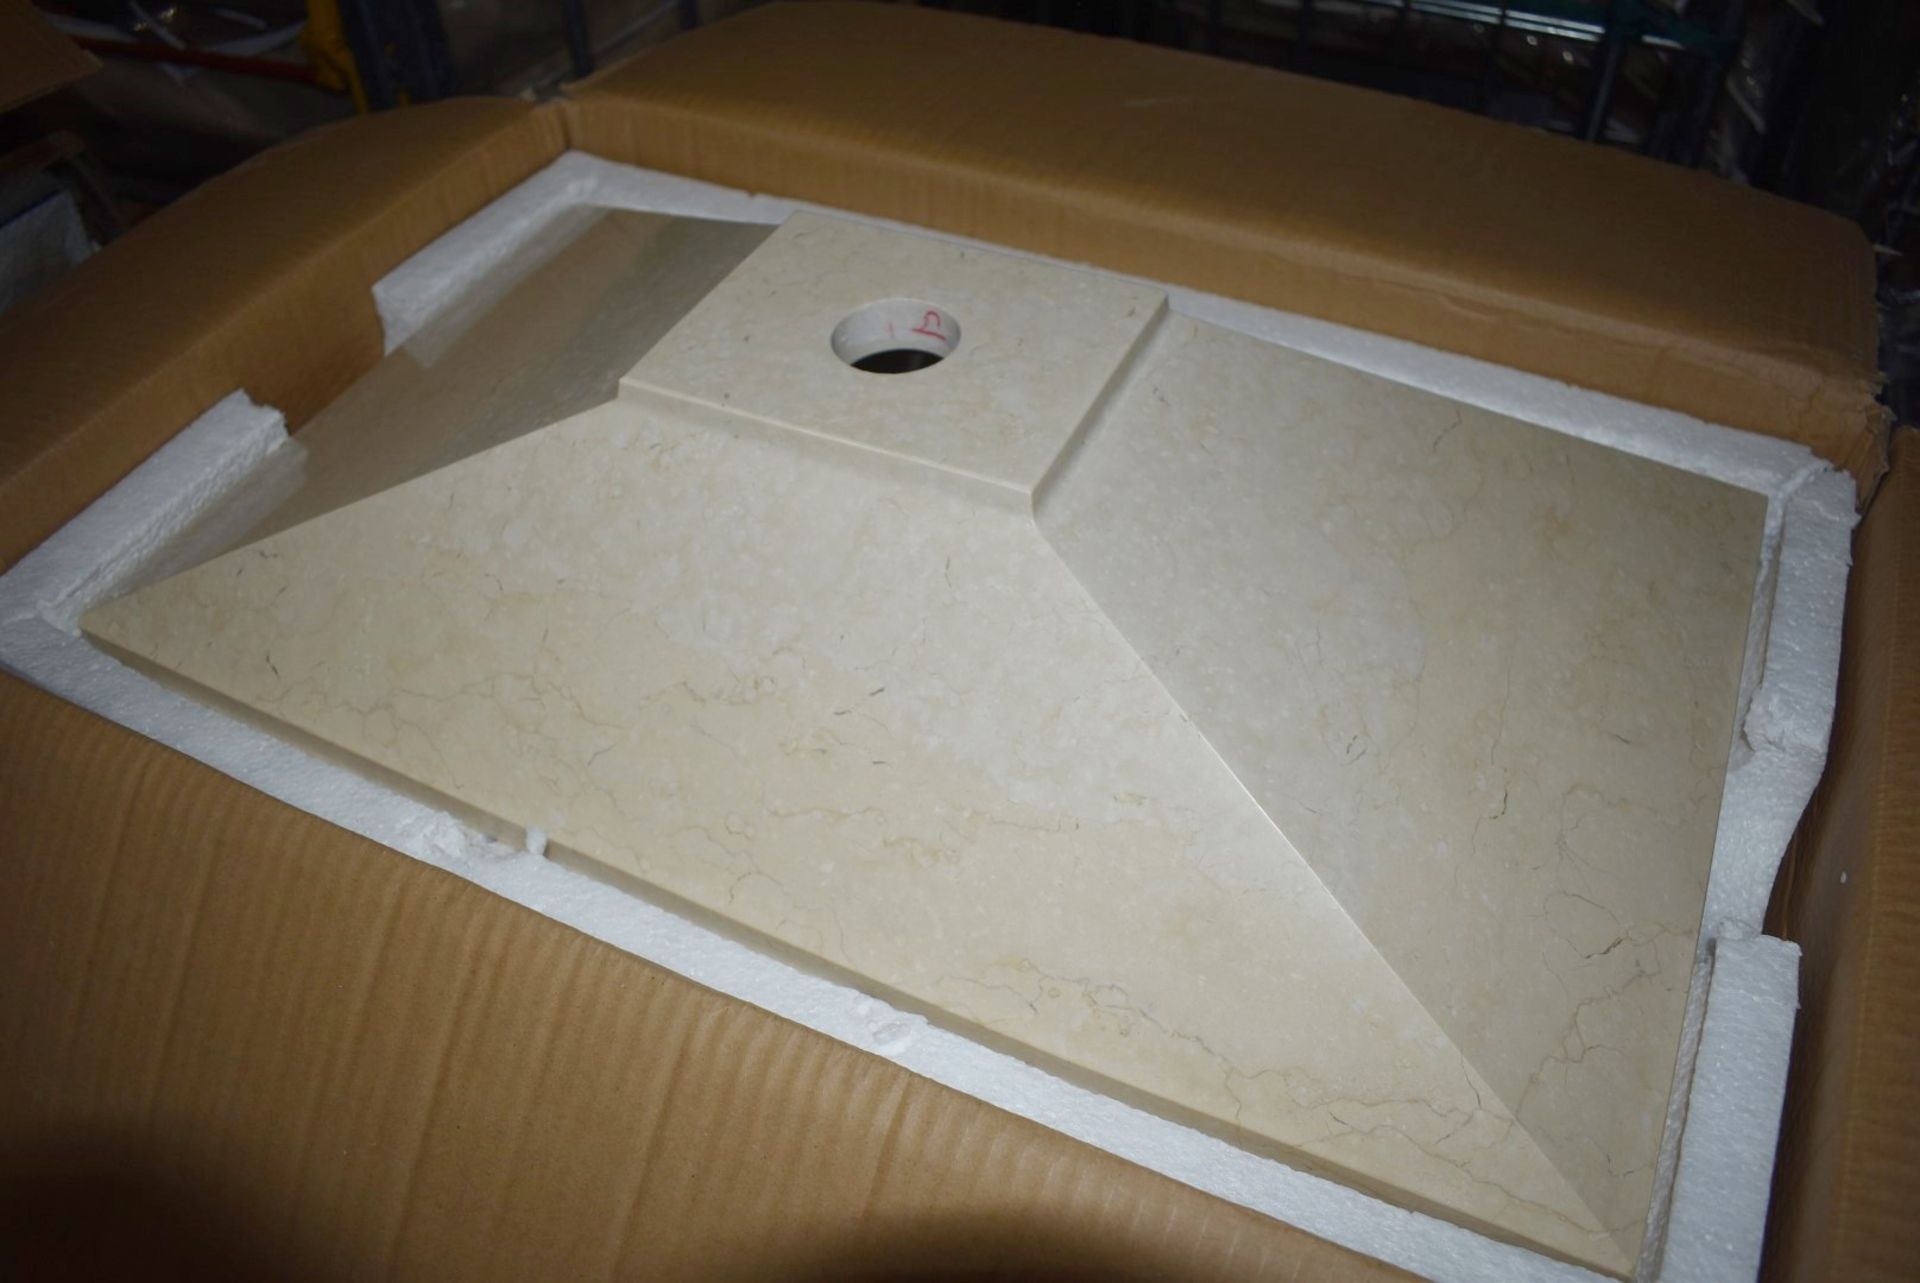 1 x Stonearth 'Karo' Solid Travertine Stone Countertop Sink Basin - New Boxed Stock - RRP £525 - - Image 7 of 8